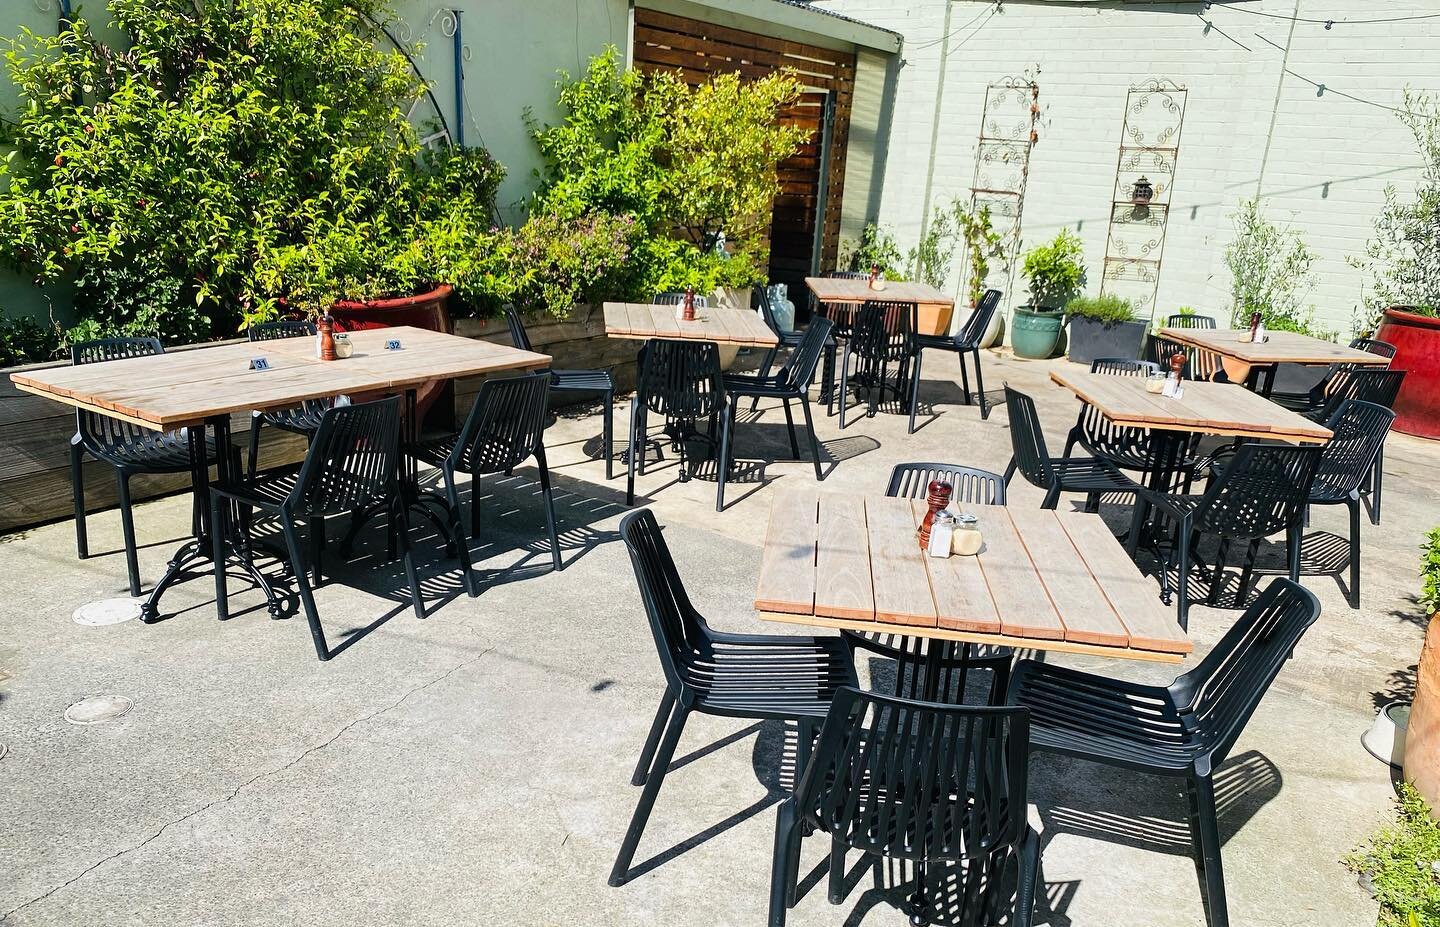 A great time of year to sit in one of our outdoor spaces. Better yet we take private bookings up to 30 people out here so get in quick for your next event. Send us an email or inquire in house to know more.